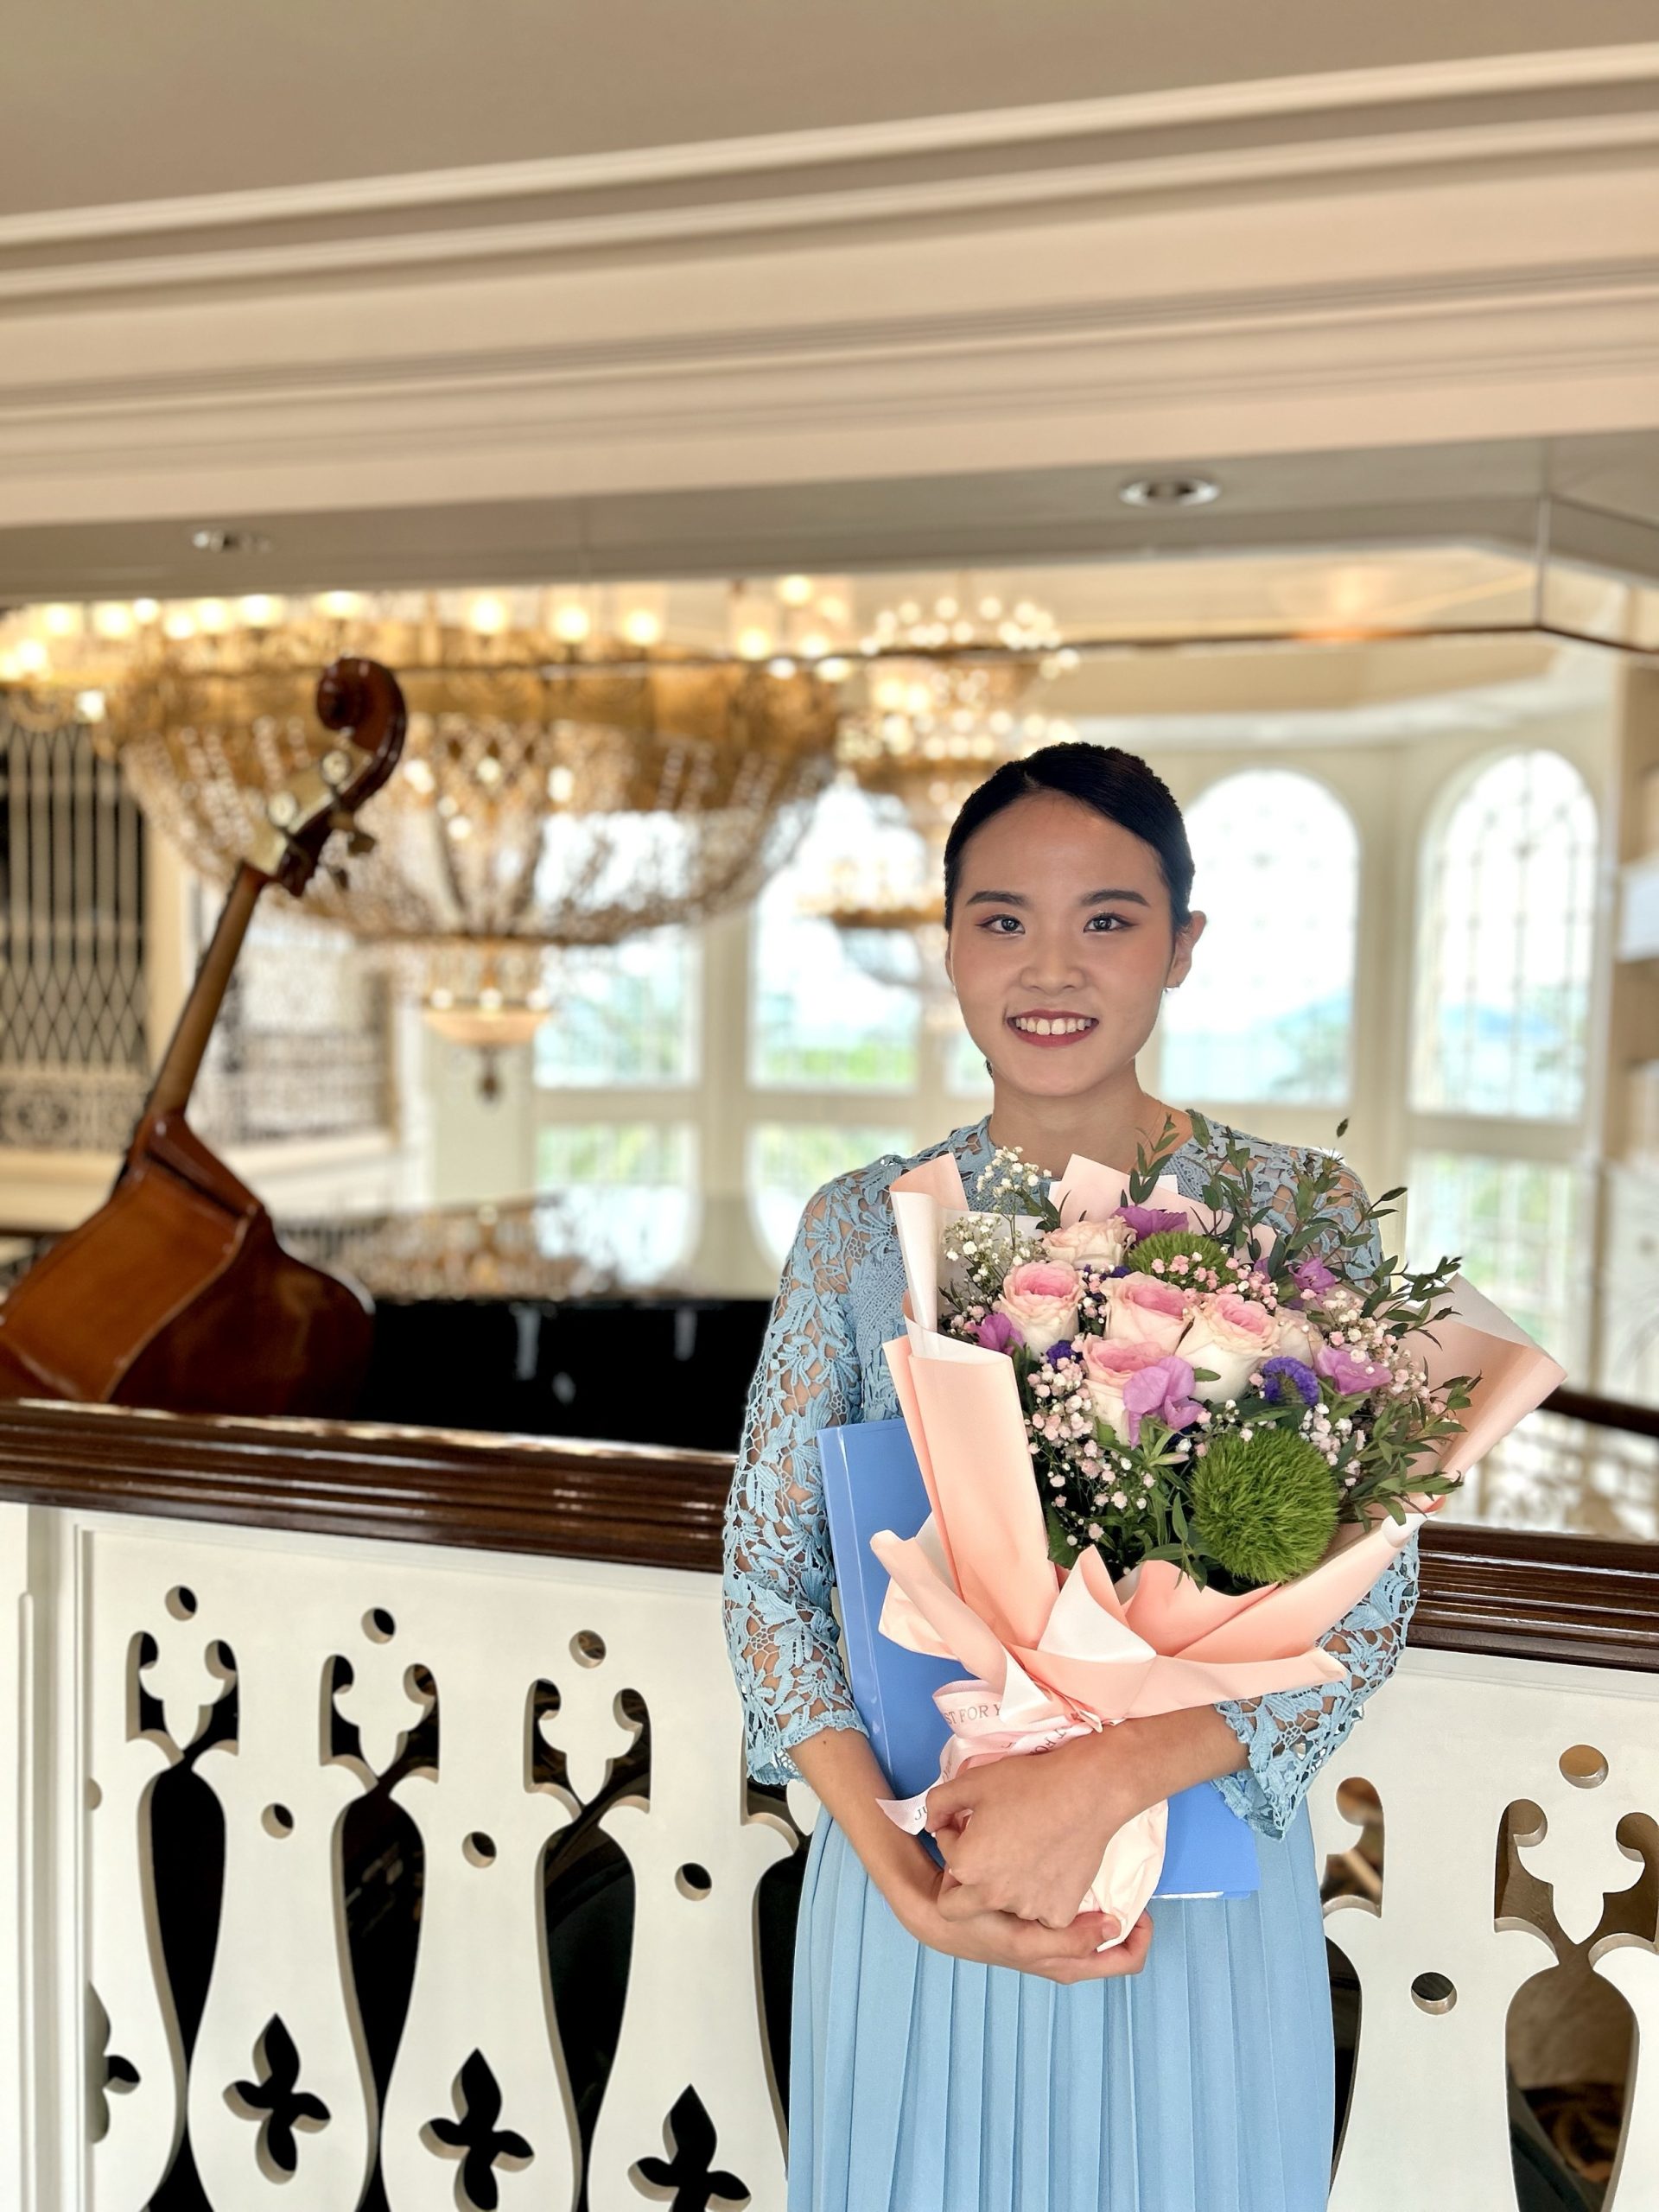 Natalie Yen holding flowers and standing in front of a piano